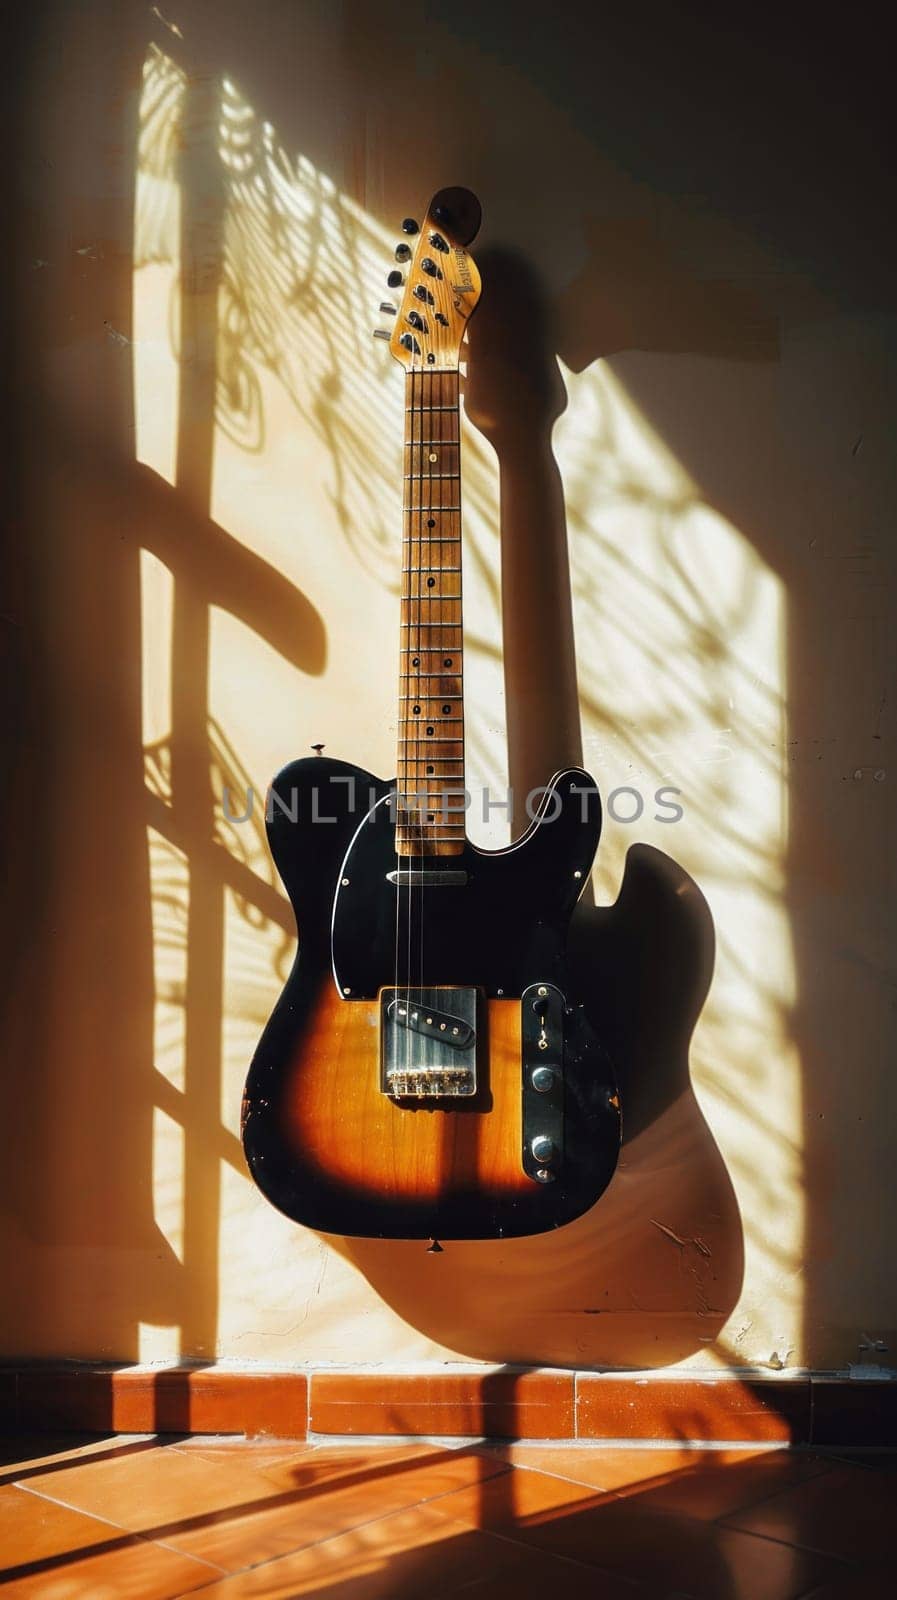 A guitar is hanging on a wall with a shadow of a leafy plant behind it by golfmerrymaker